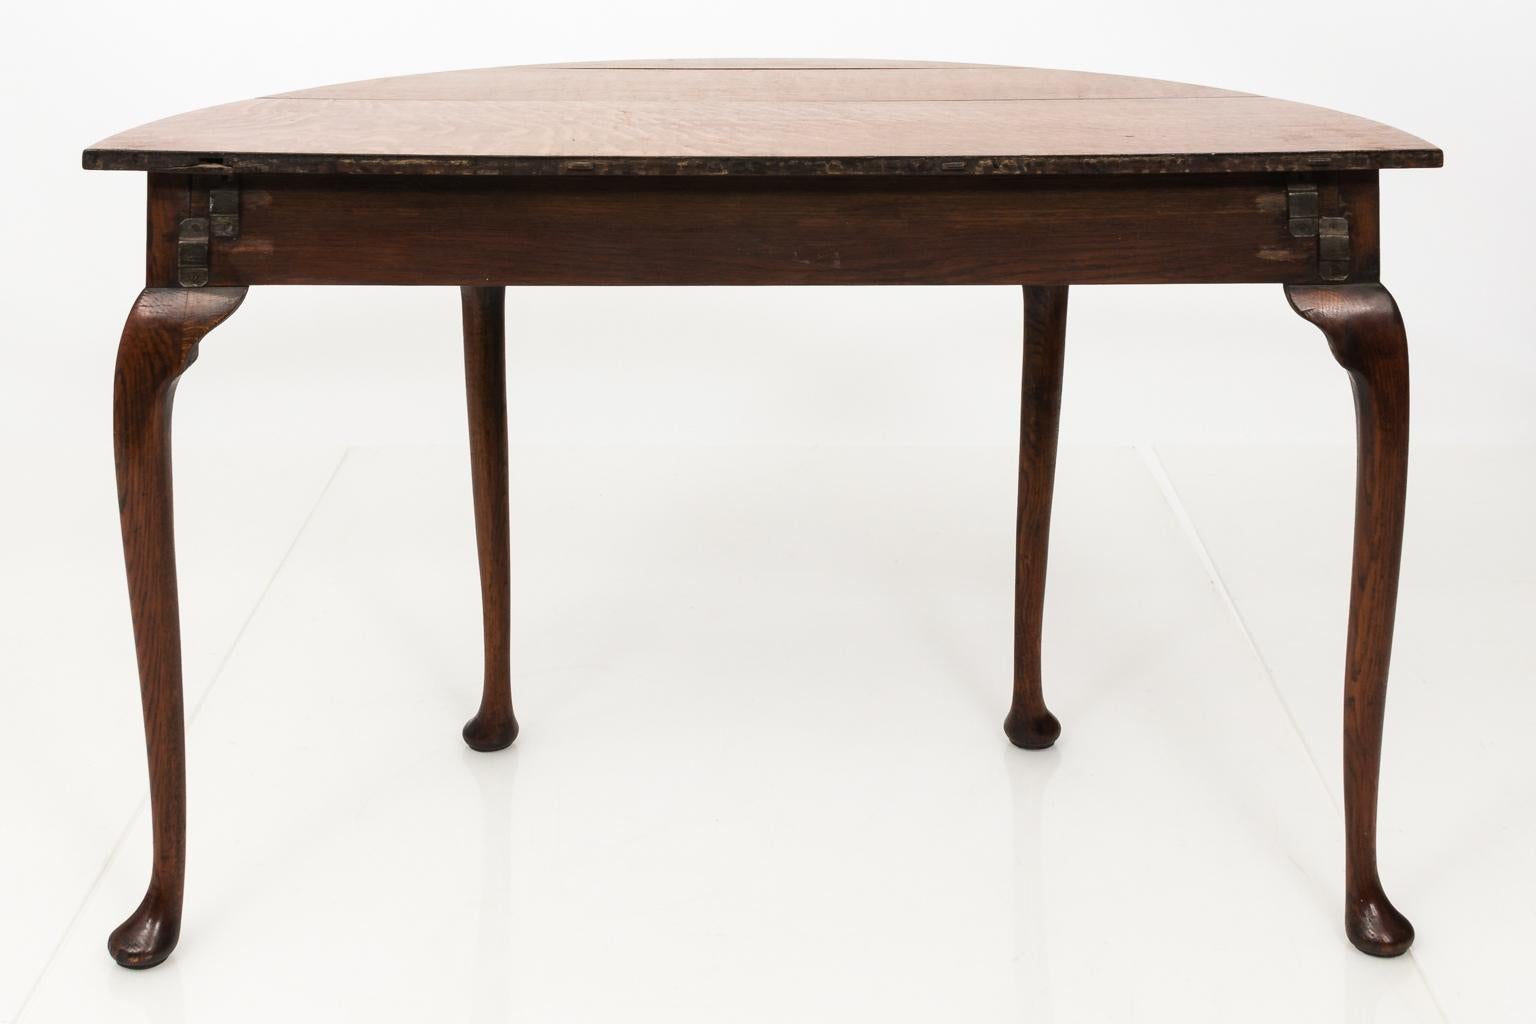 Pair of oak demilune tables with pad feet, circa 1740. The back of each piece features mortise and tenon slots to create a circular center table.